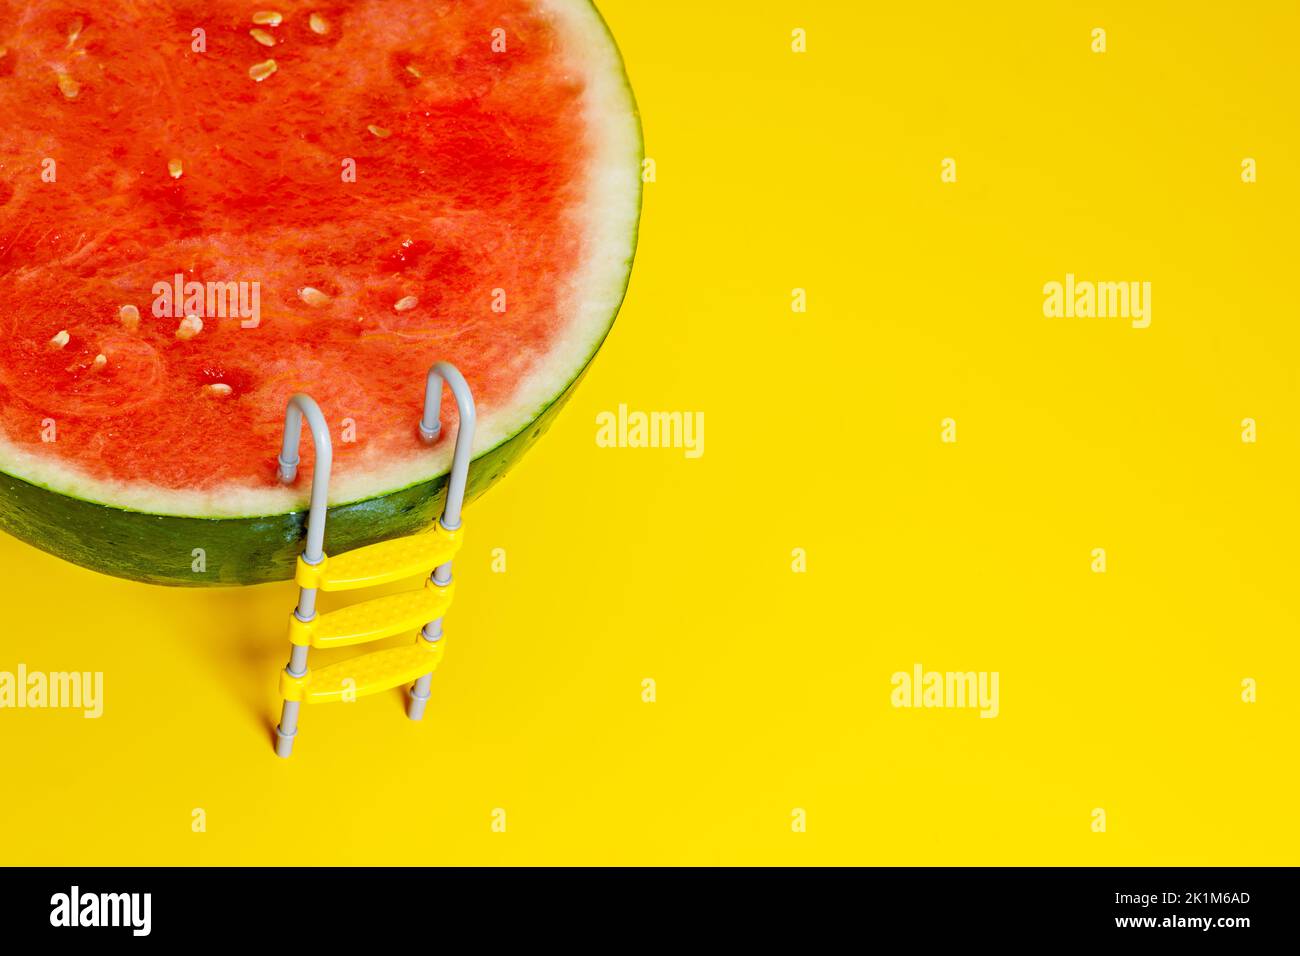 Juicy concept - watermelon fruit with pool ladder allegory Stock Photo